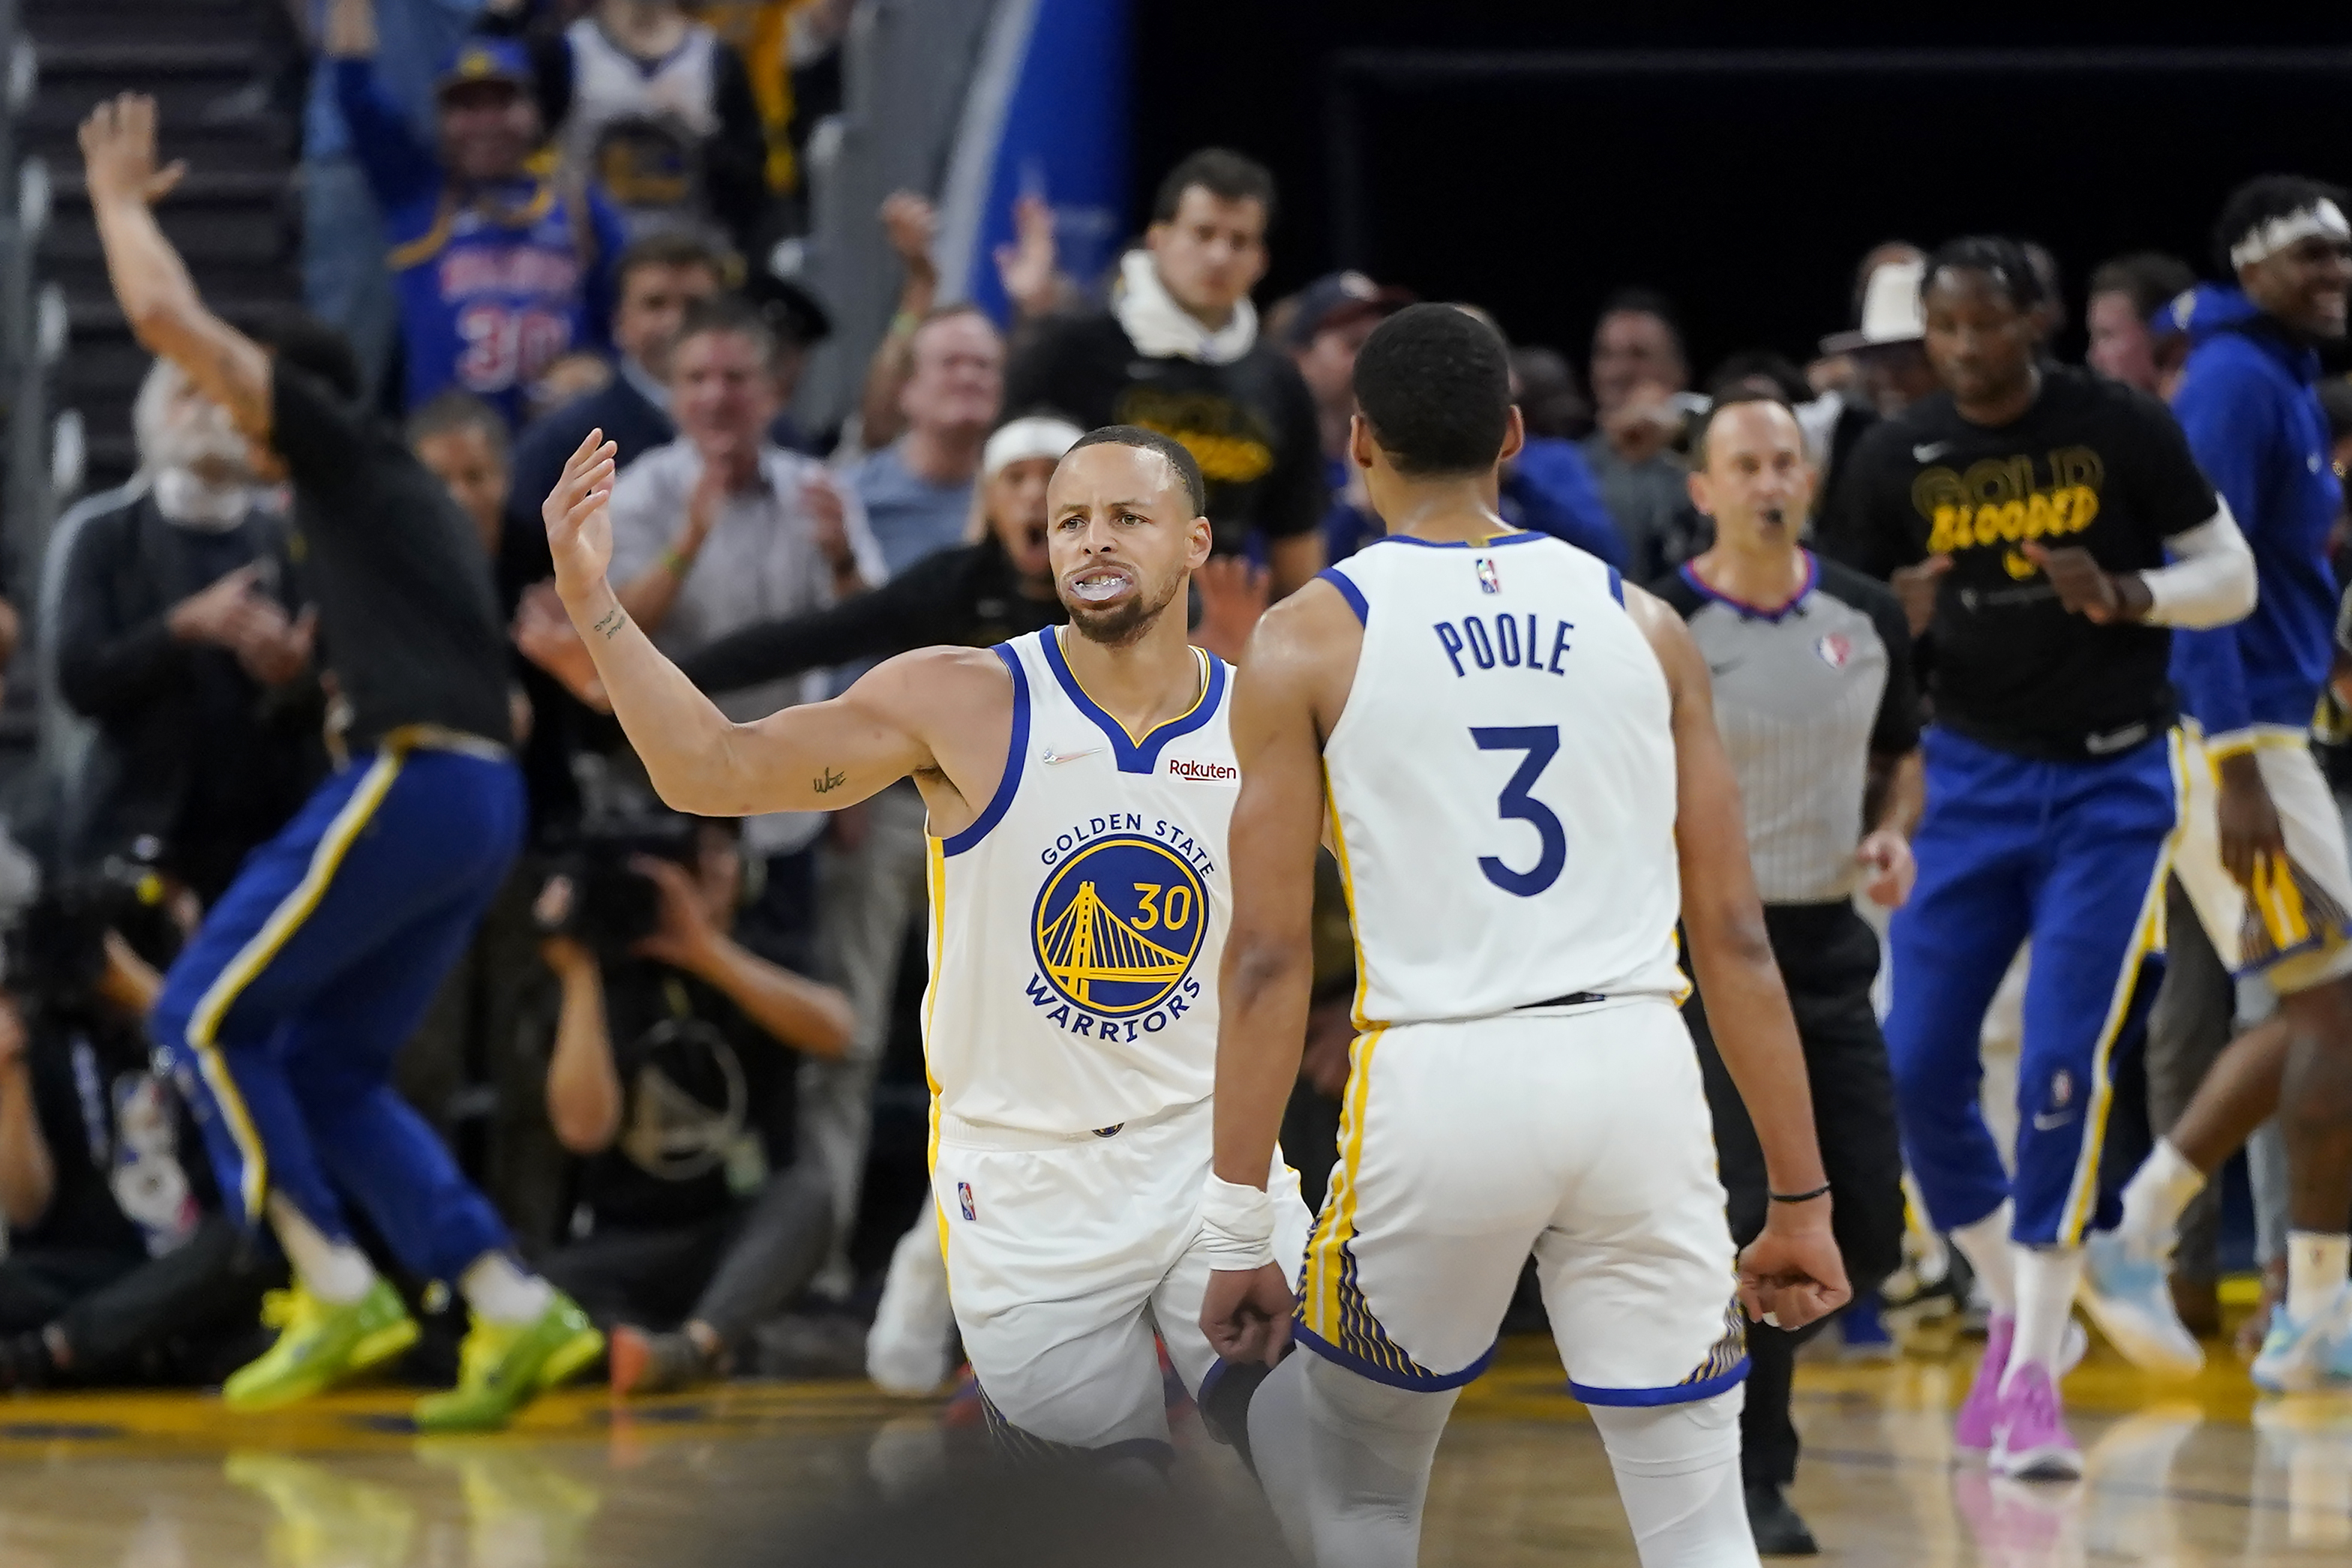 Stephen Curry and Warriors roll in Game 5 as series heads back to